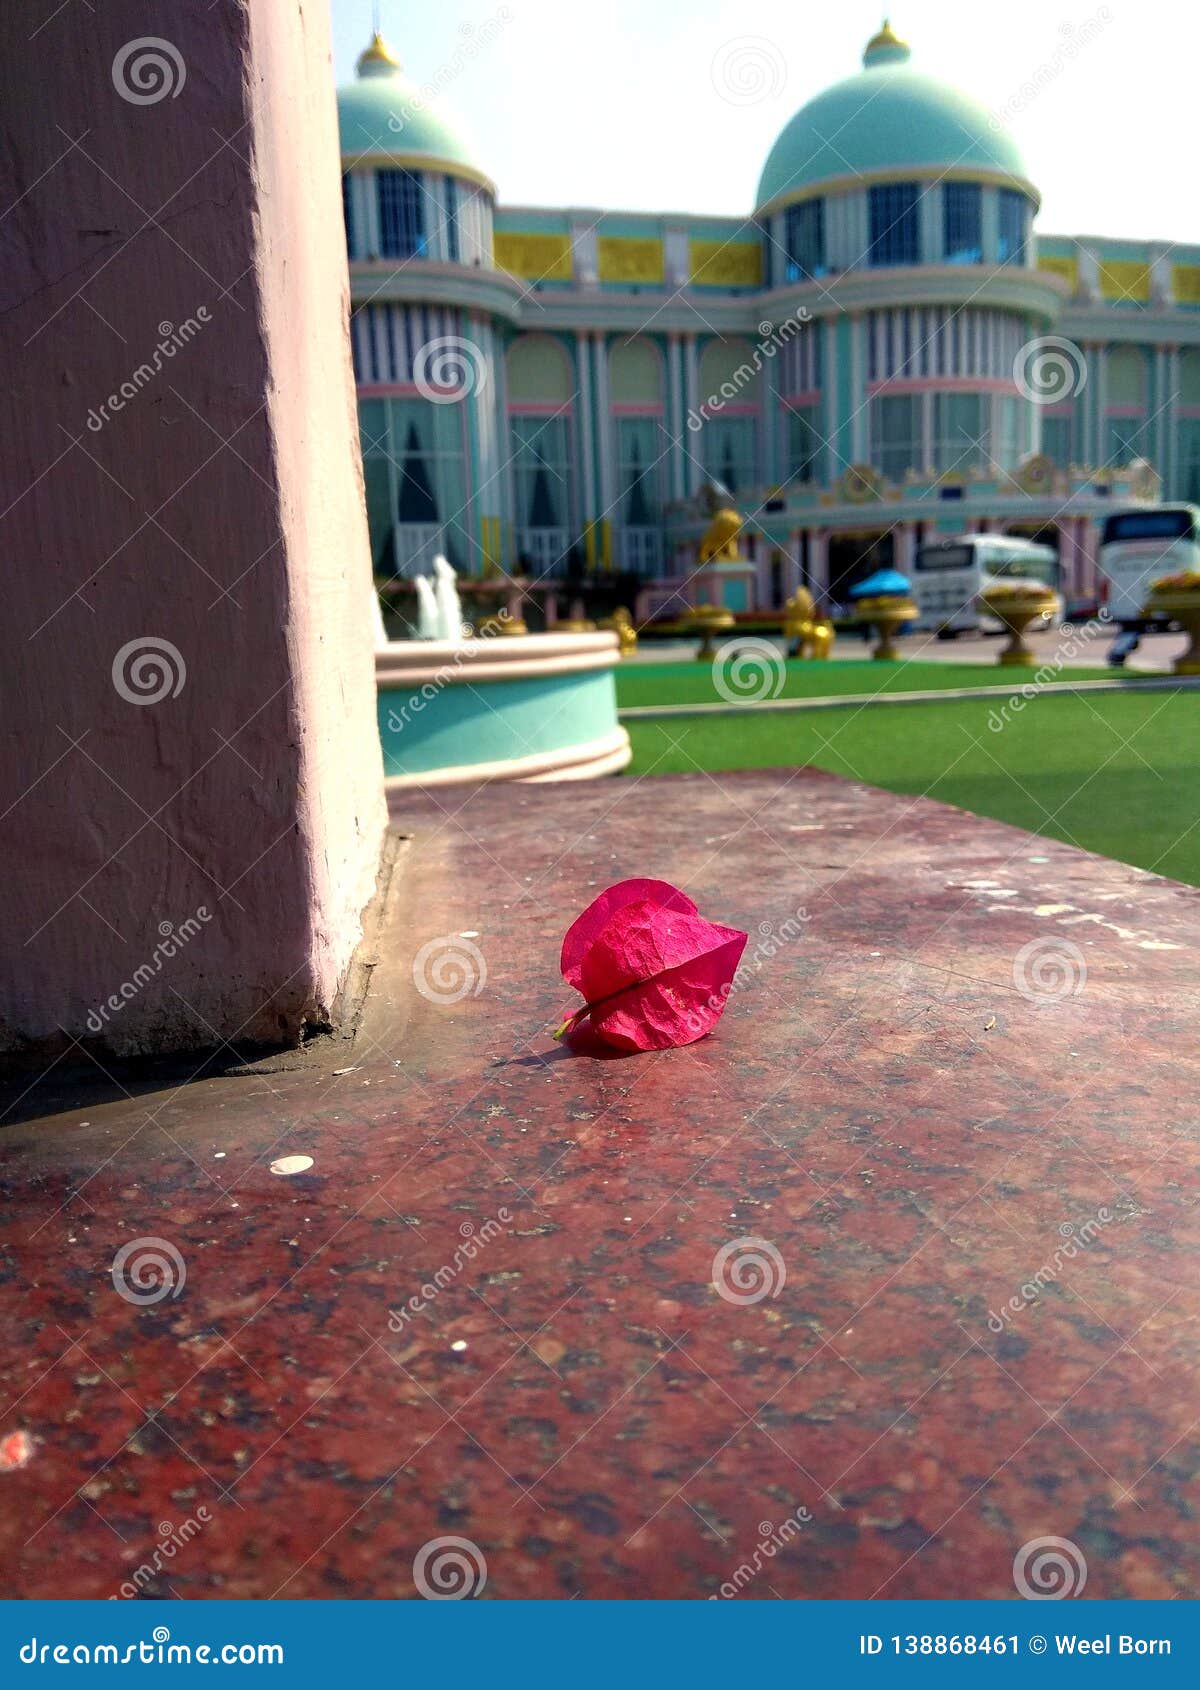 A pink flower fallen on the floor - using for wallpaper or web background.